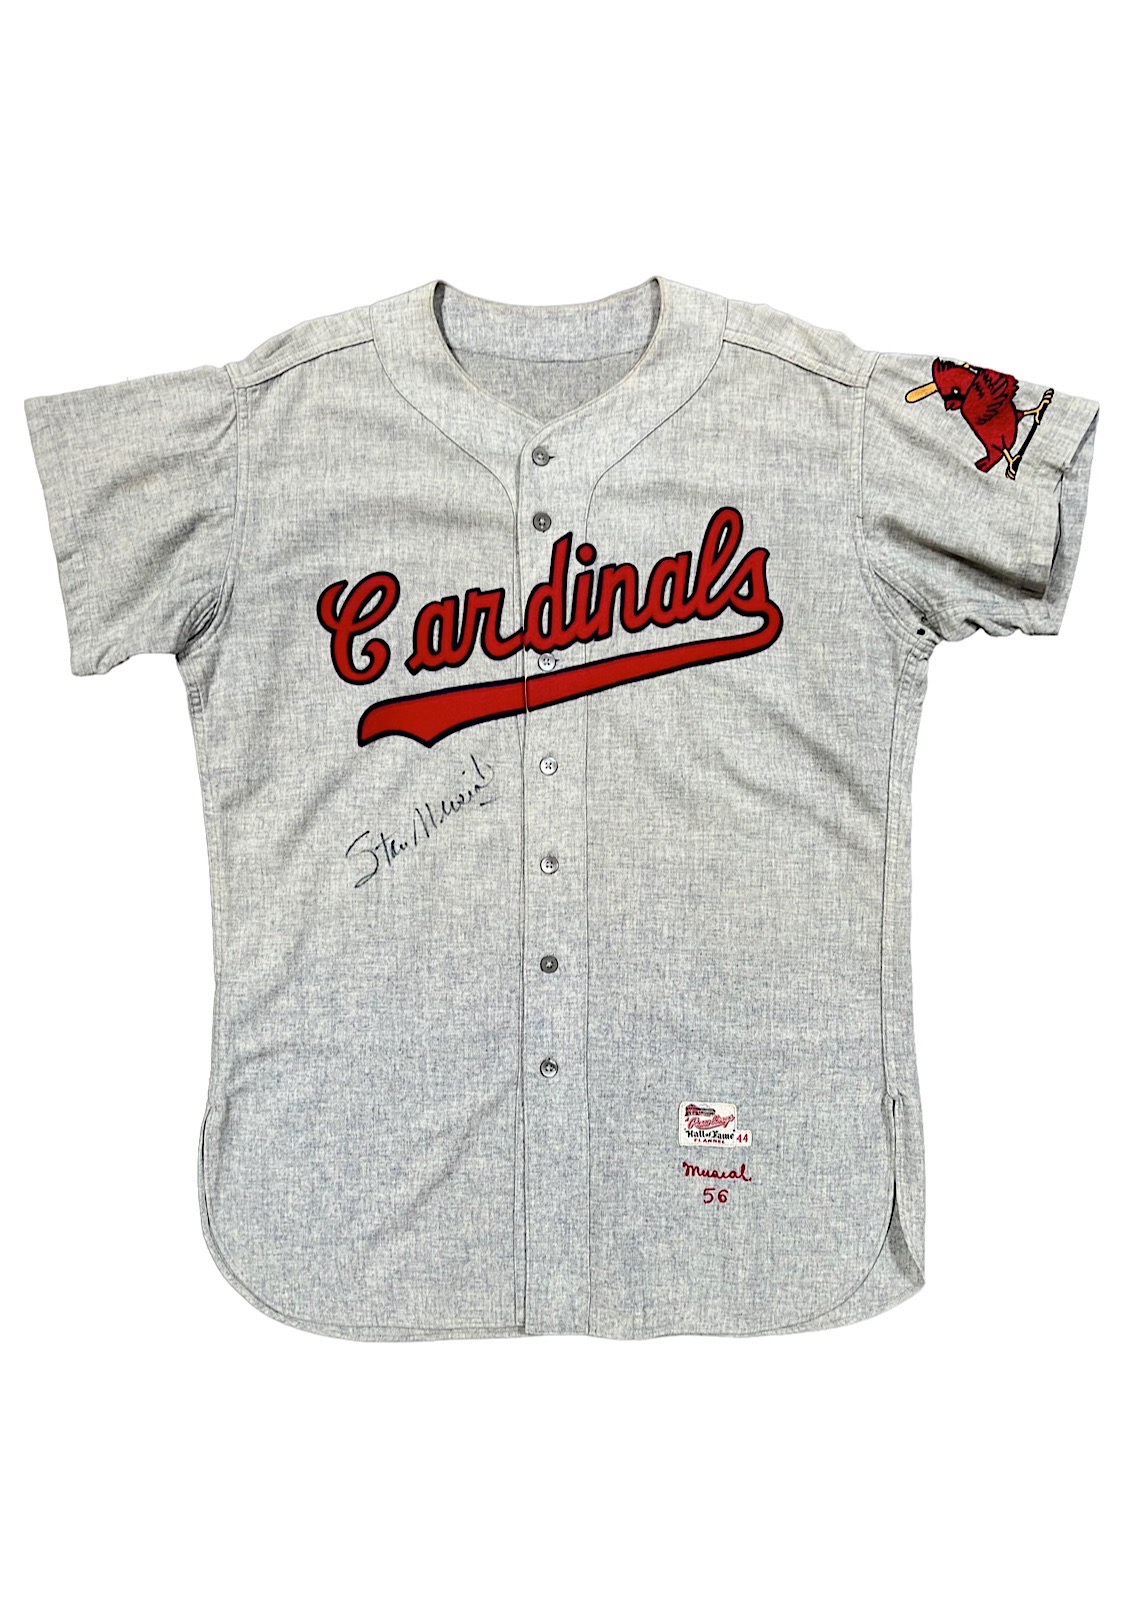 Stan Musial Jersey In Mlb Autographed Jerseys for sale